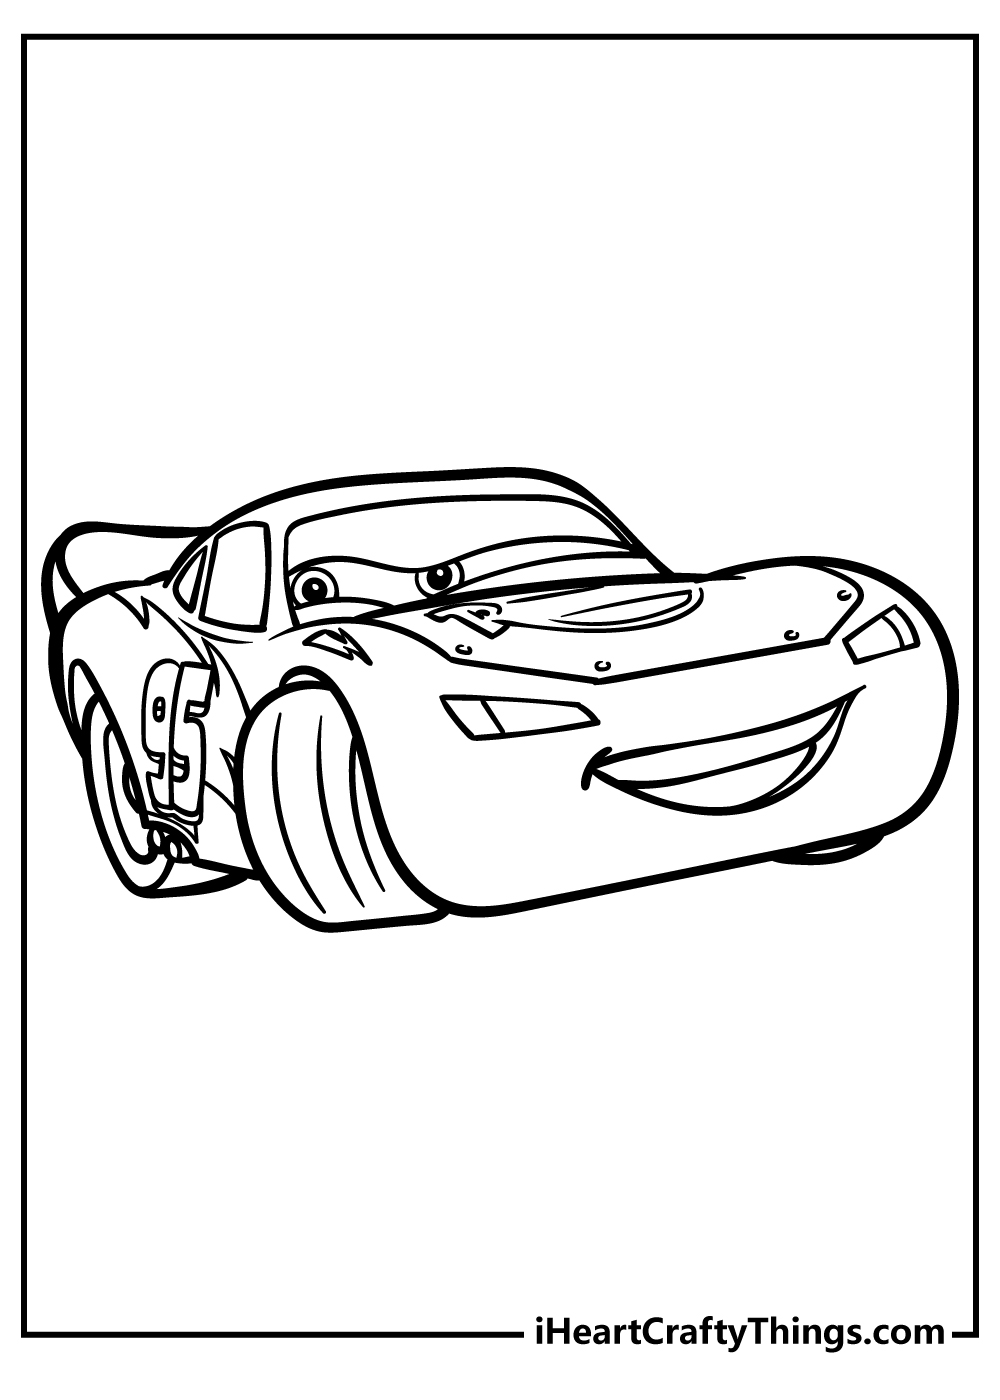 Lightning McQueen Coloring Sheet for children free download